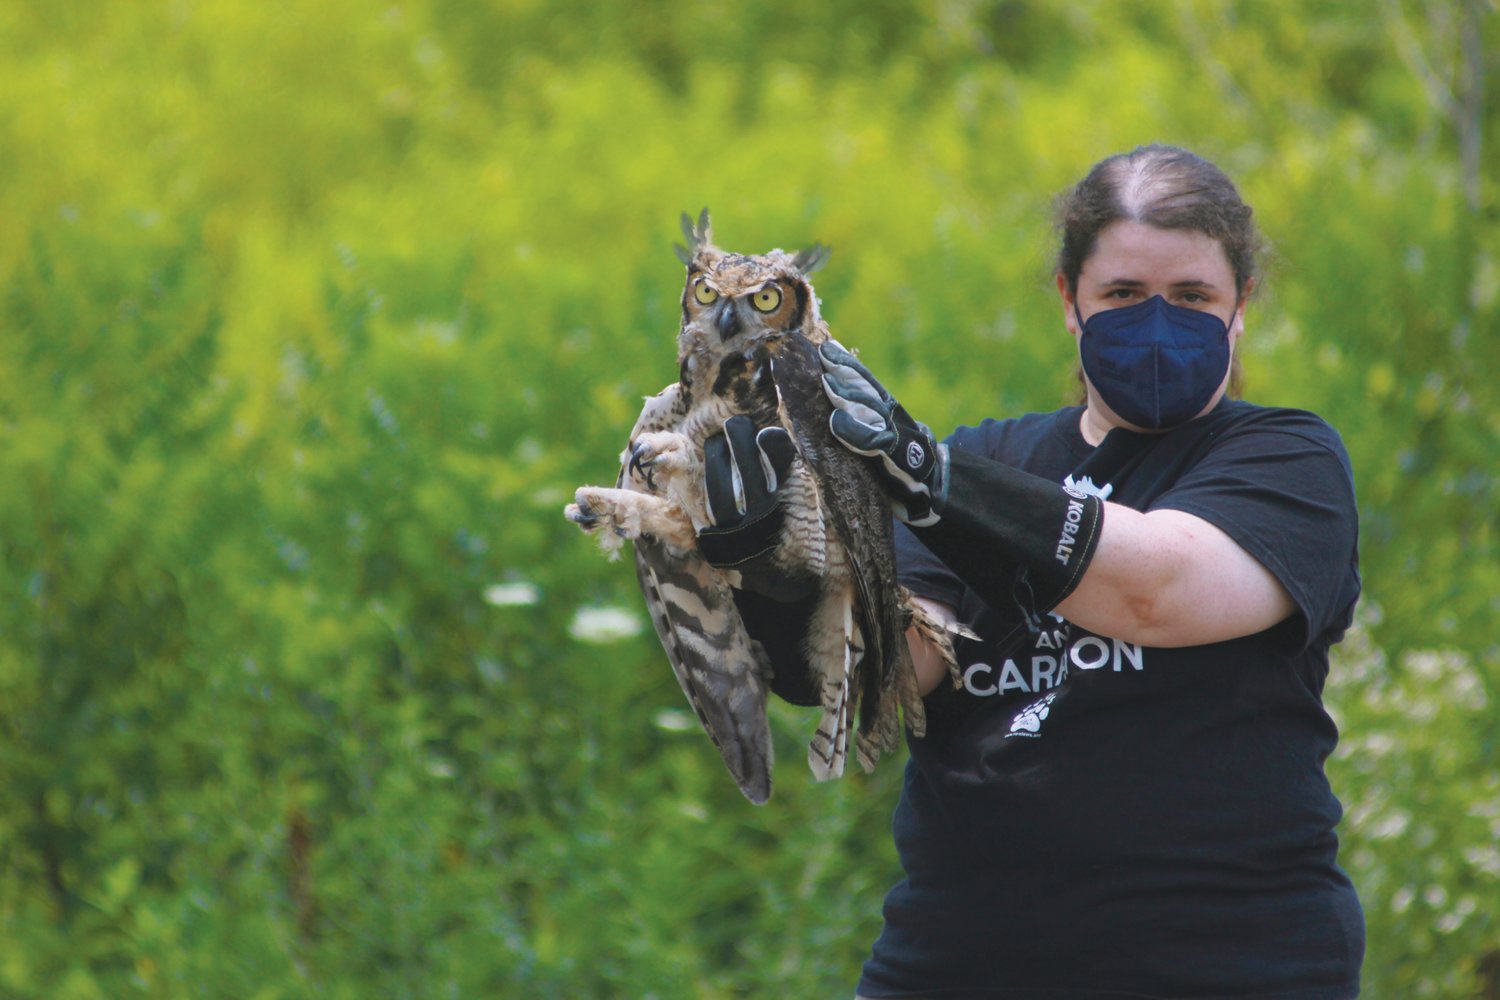 A volunteer gently holds one of two great horned owls with gloved hand before it is released during the Claws wildlife education event on Saturday at Starrlight Mead in Pittsboro. Once released, one of the owls immedietly flew away, while the other was hesiant and needed some persuasion to fly away.